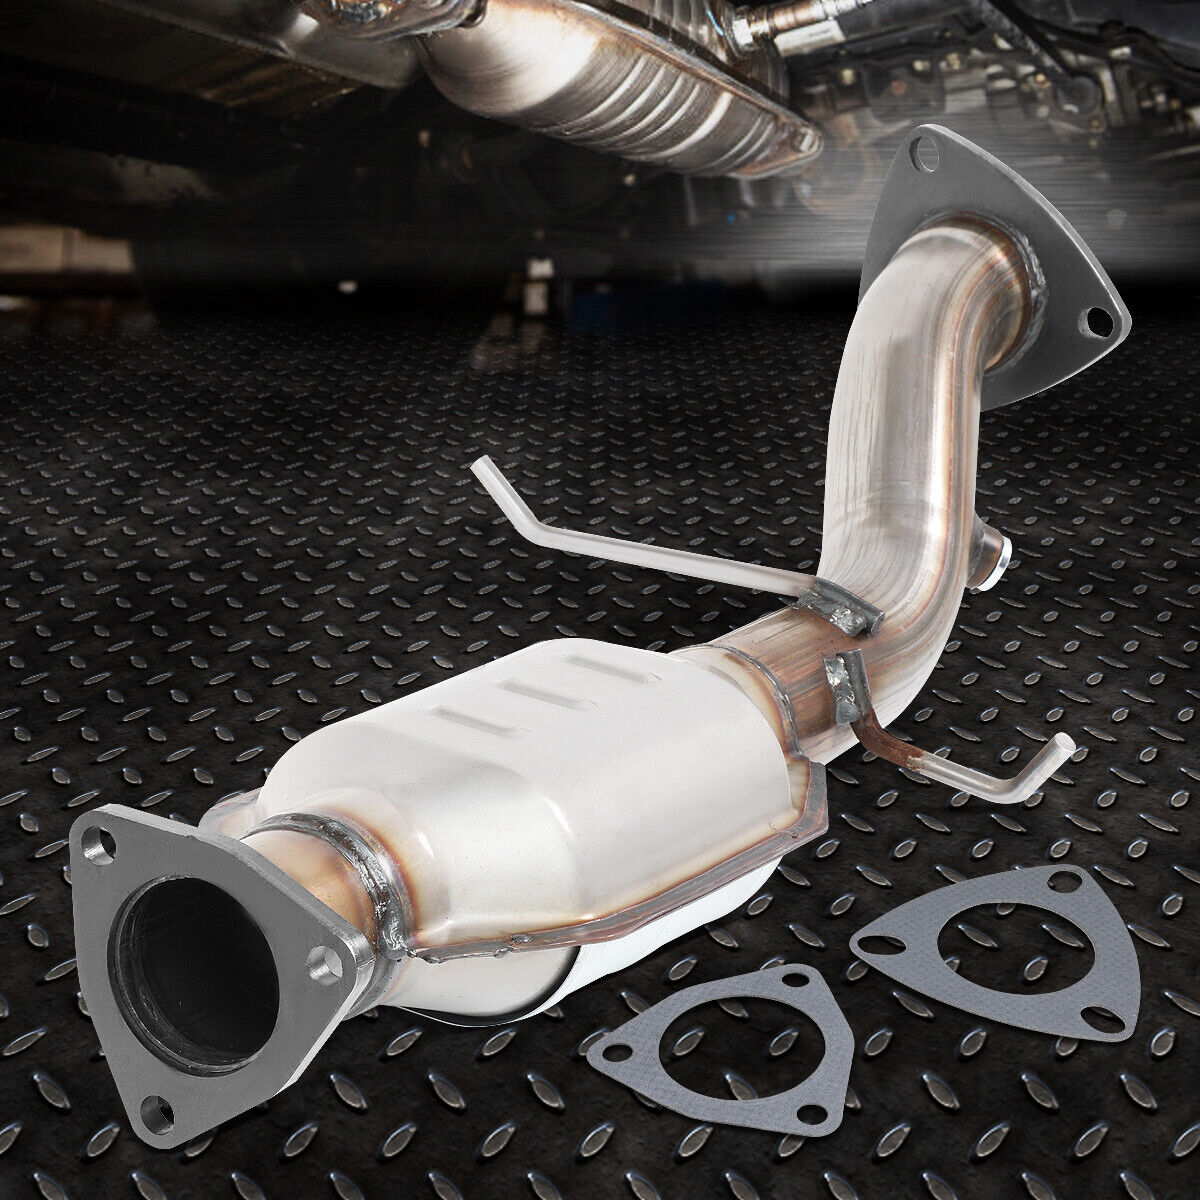 FOR 96-99 CHEVY BLAZER GMC JIMMY 4.3L V6 CATALYTIC CONVERTER REAR EXHAUST PIPE